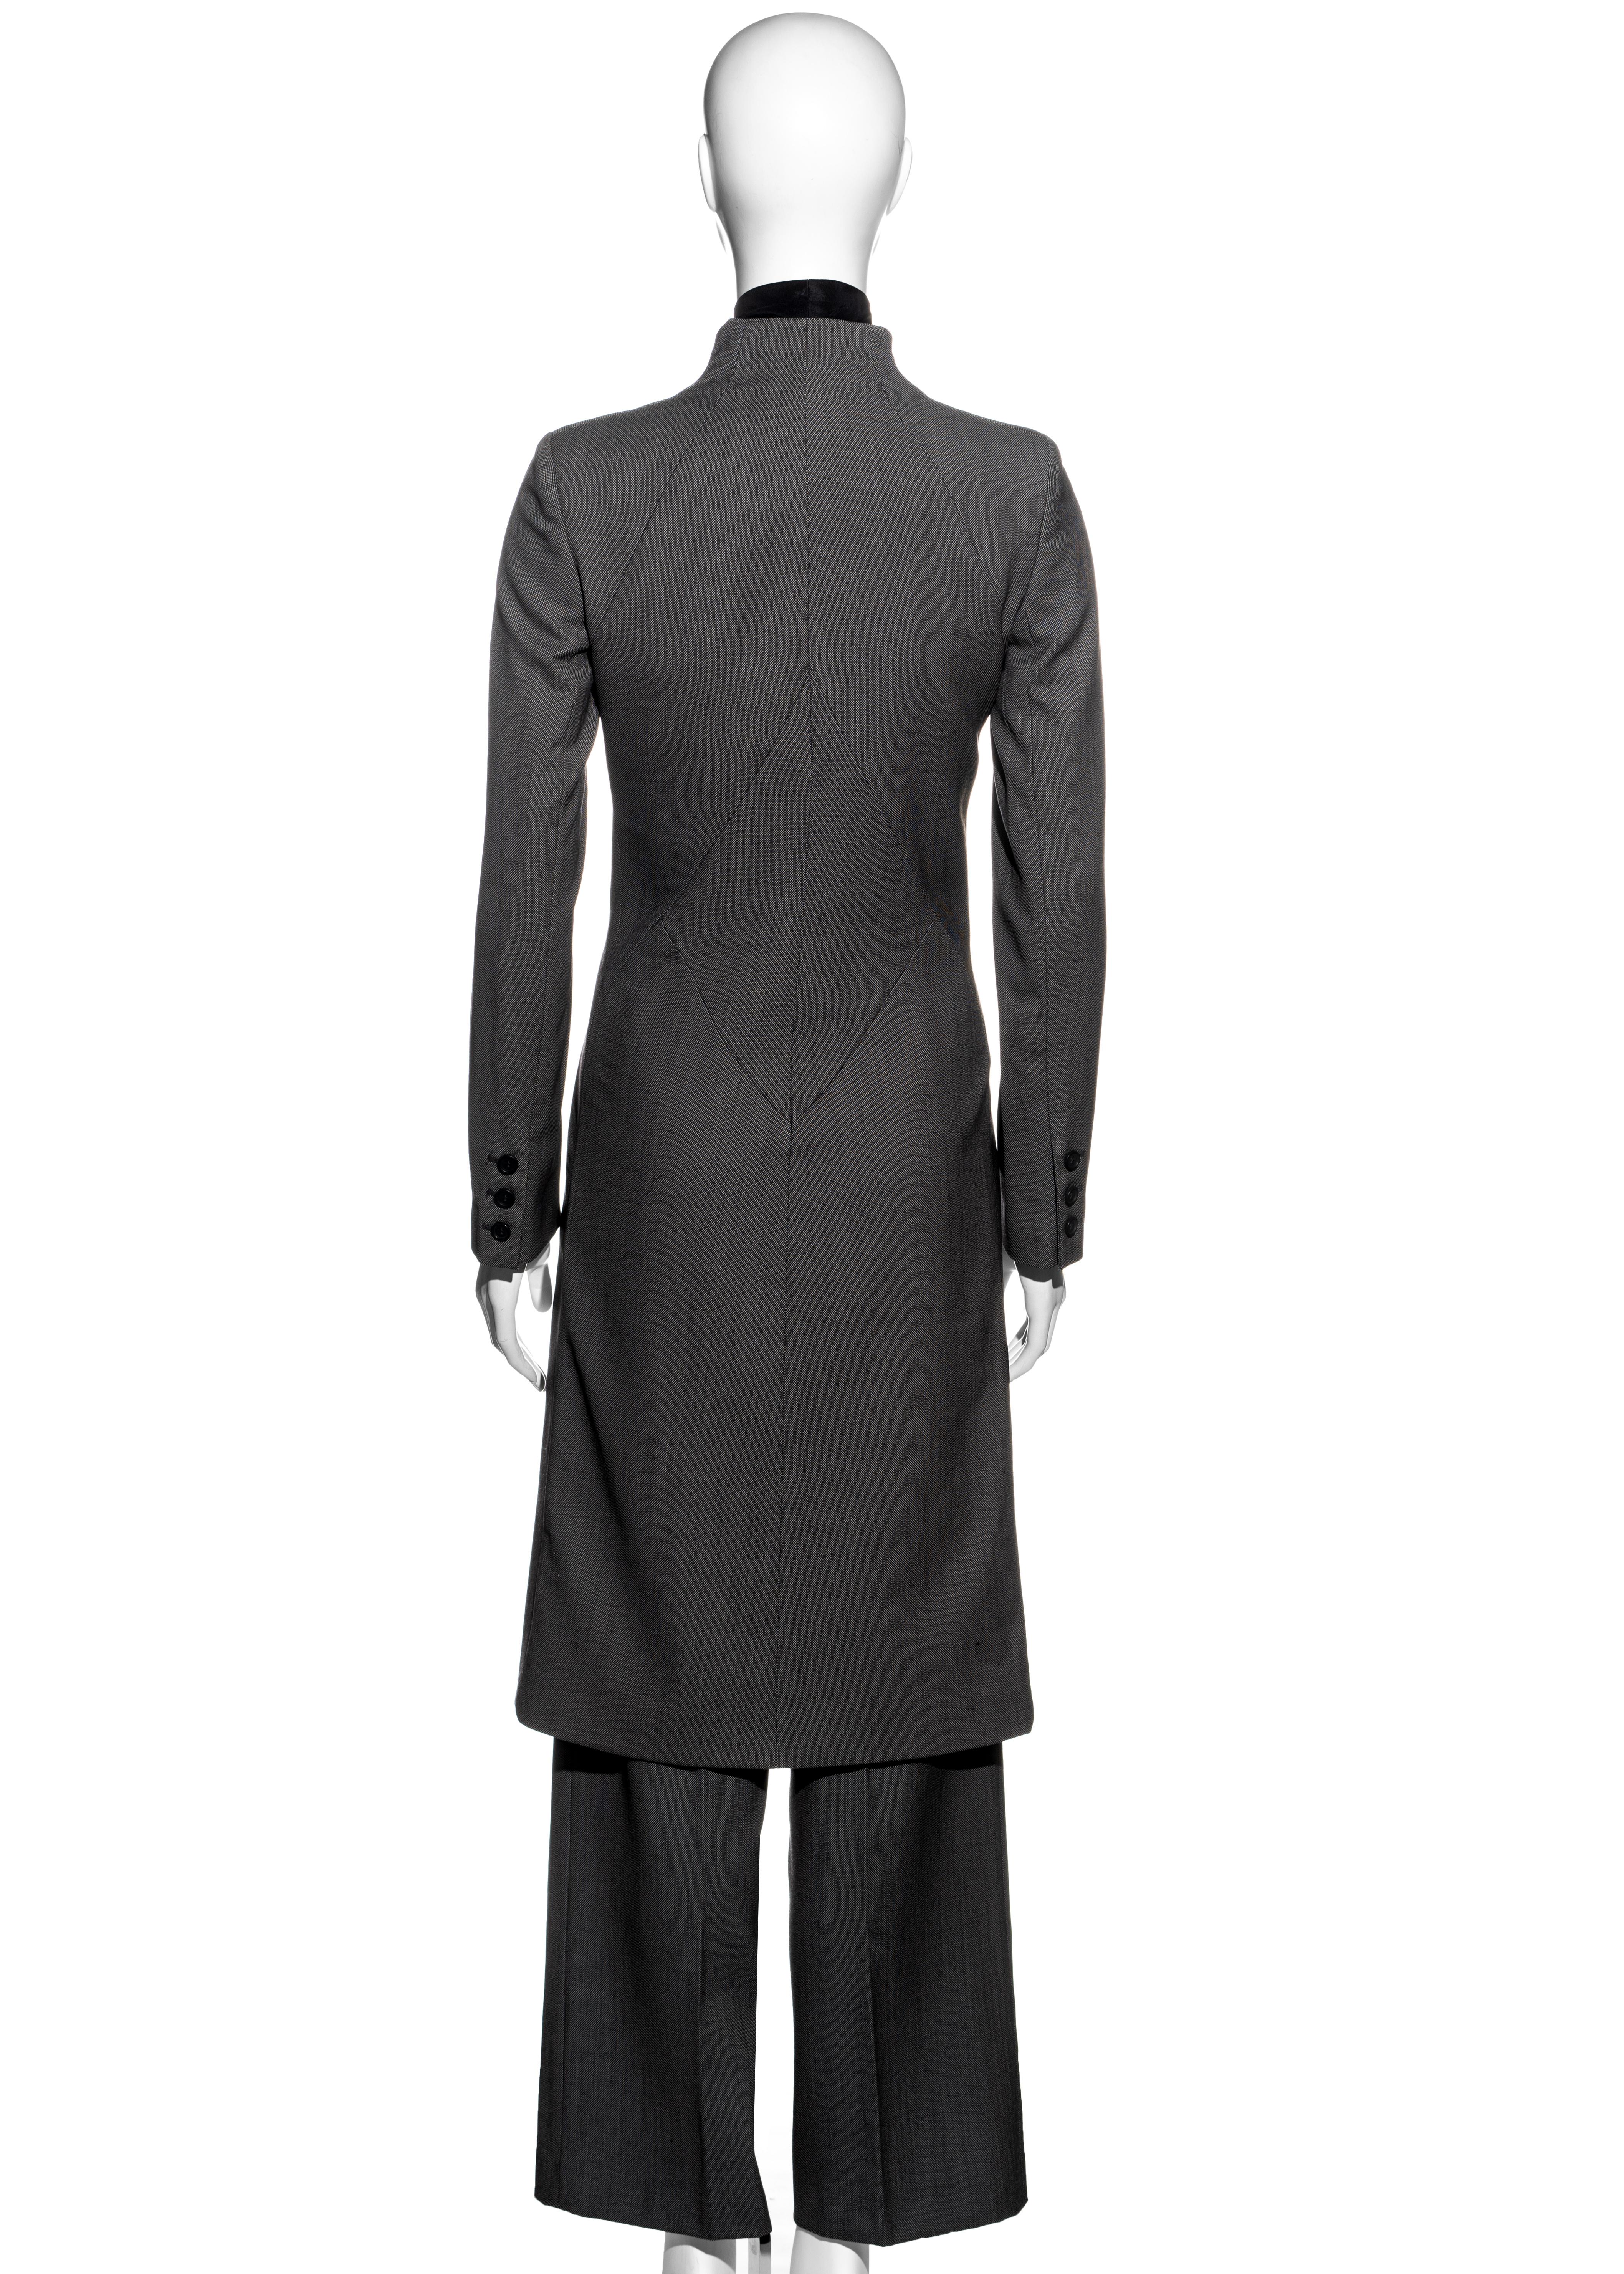 Alexander McQueen grey wool structured pant suit, fw 2000 For Sale 3